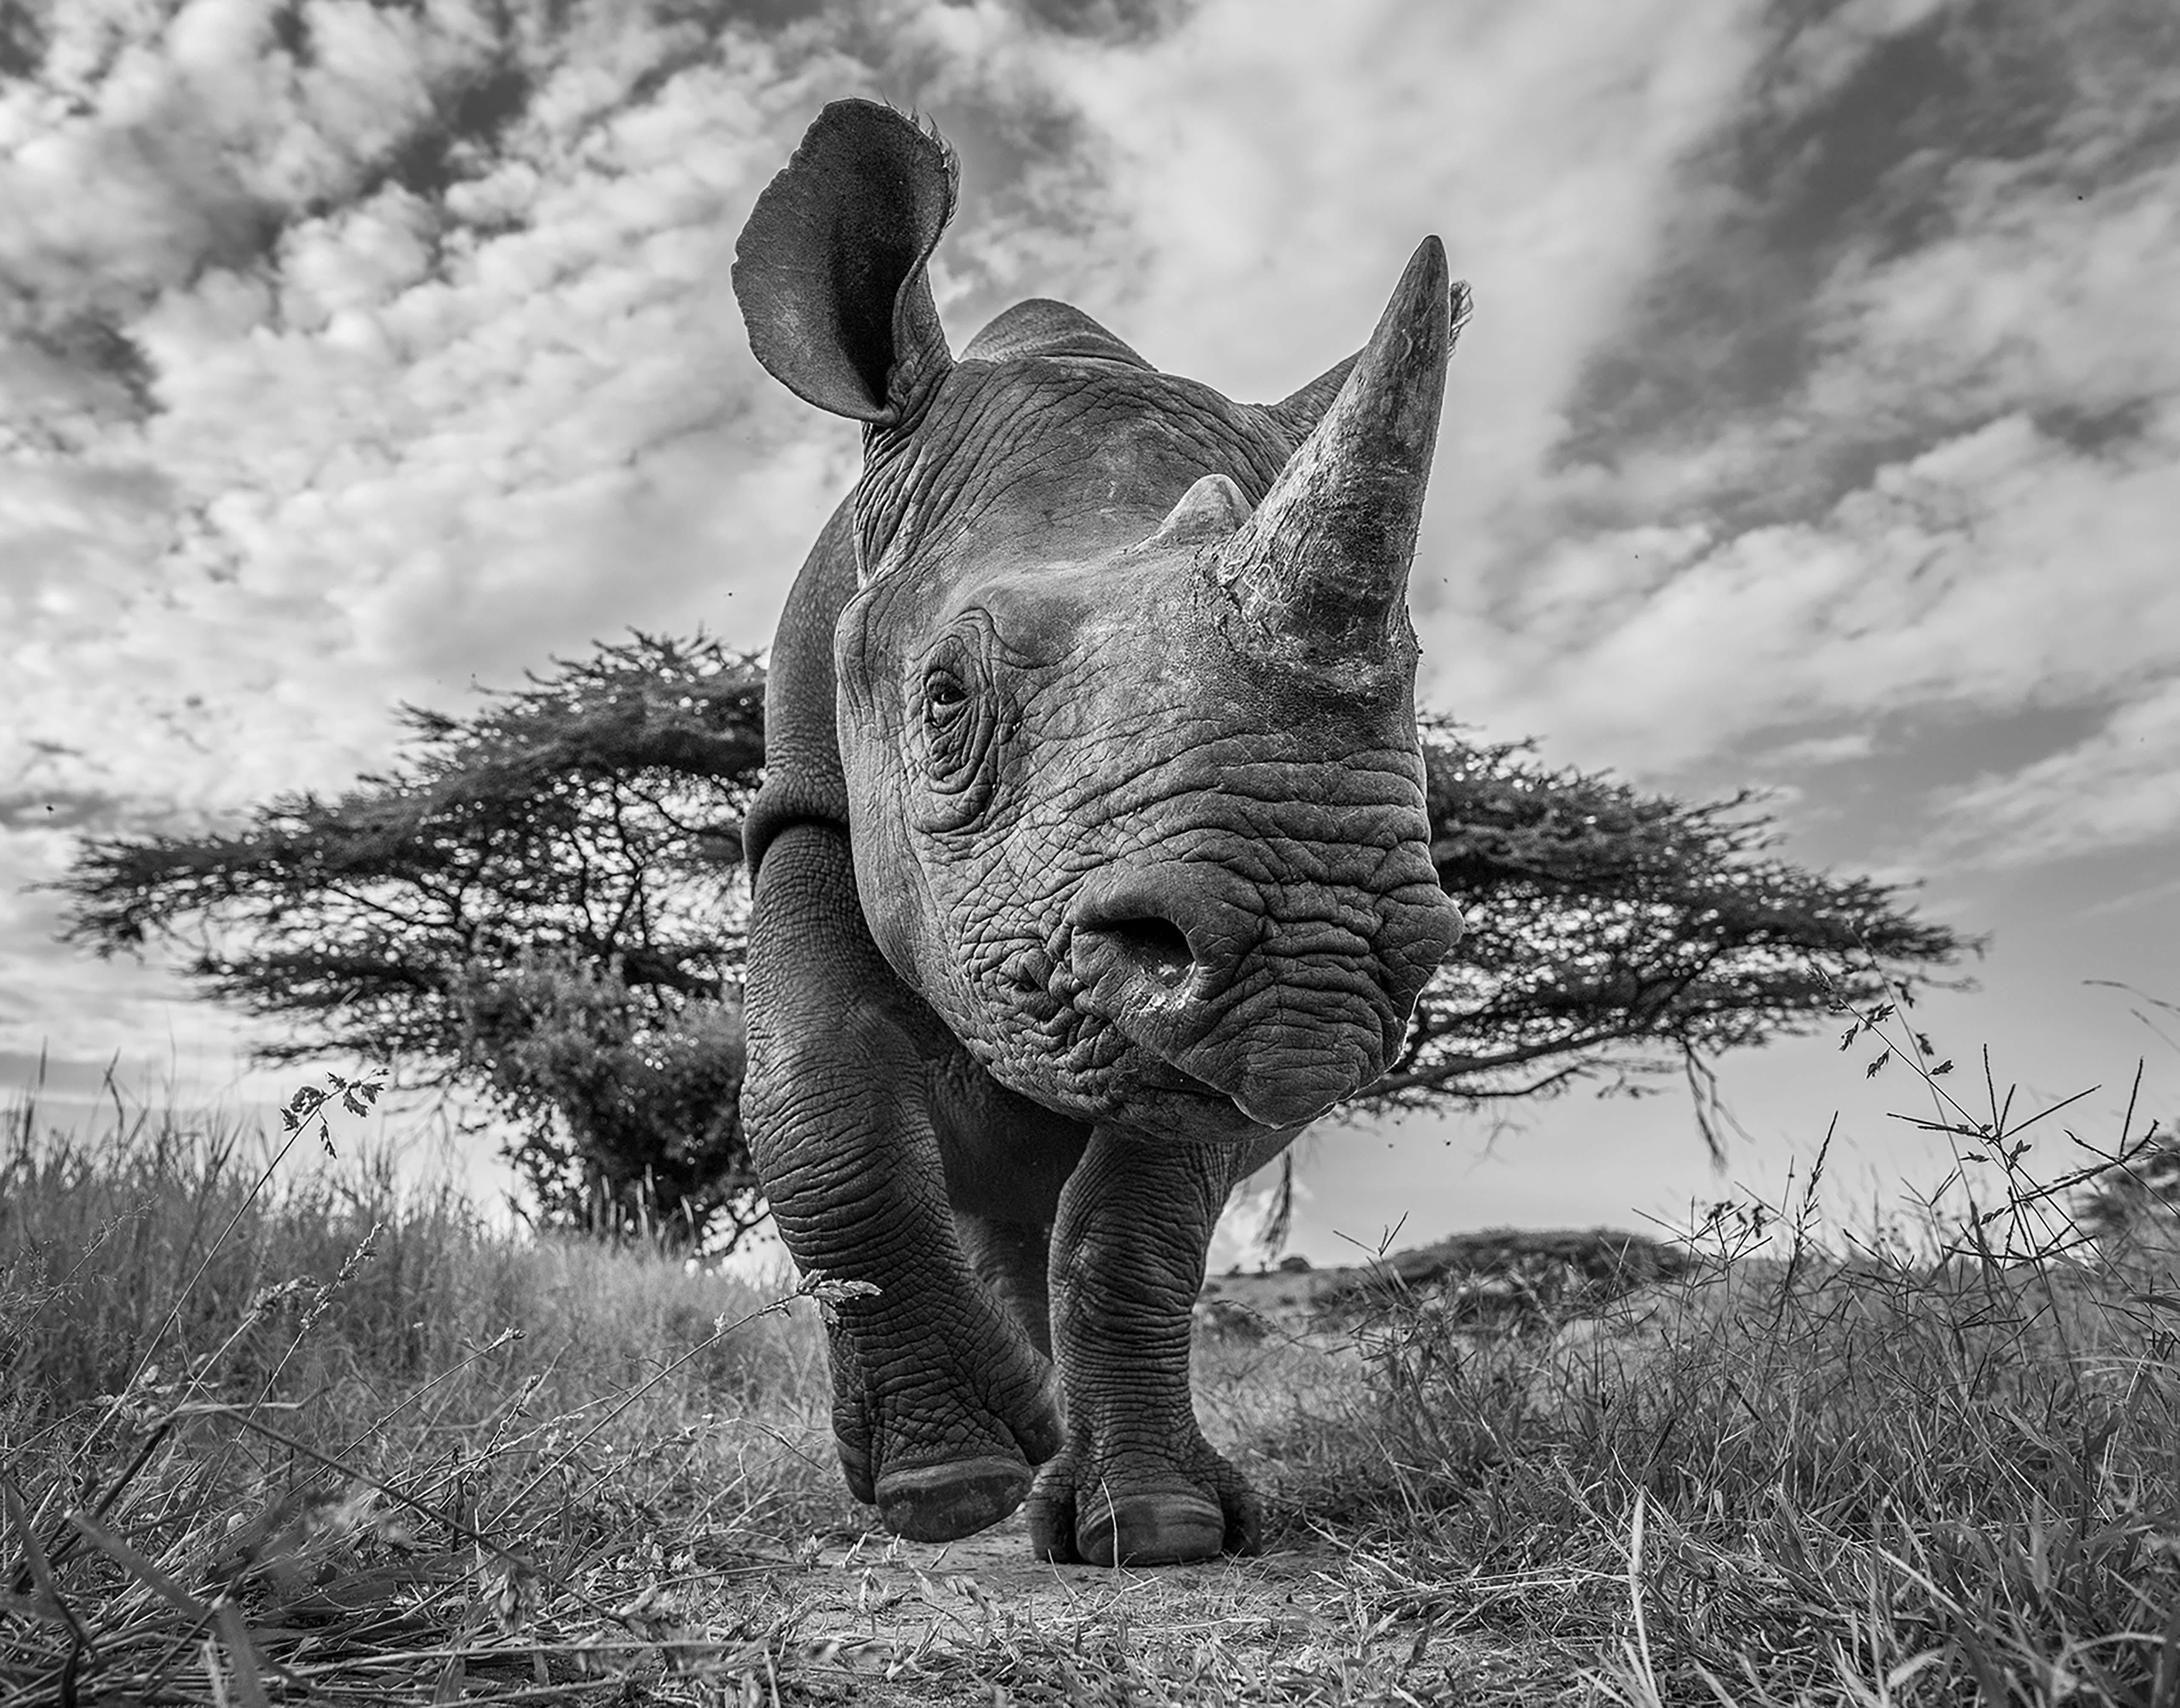 "Placing a well positioned remote camera with a wide angle lens allows for unique and intimate images. It is as if the rhino is walking out of the frame. 

This shot was a big moment for me. This was my first real success with remotes and has always